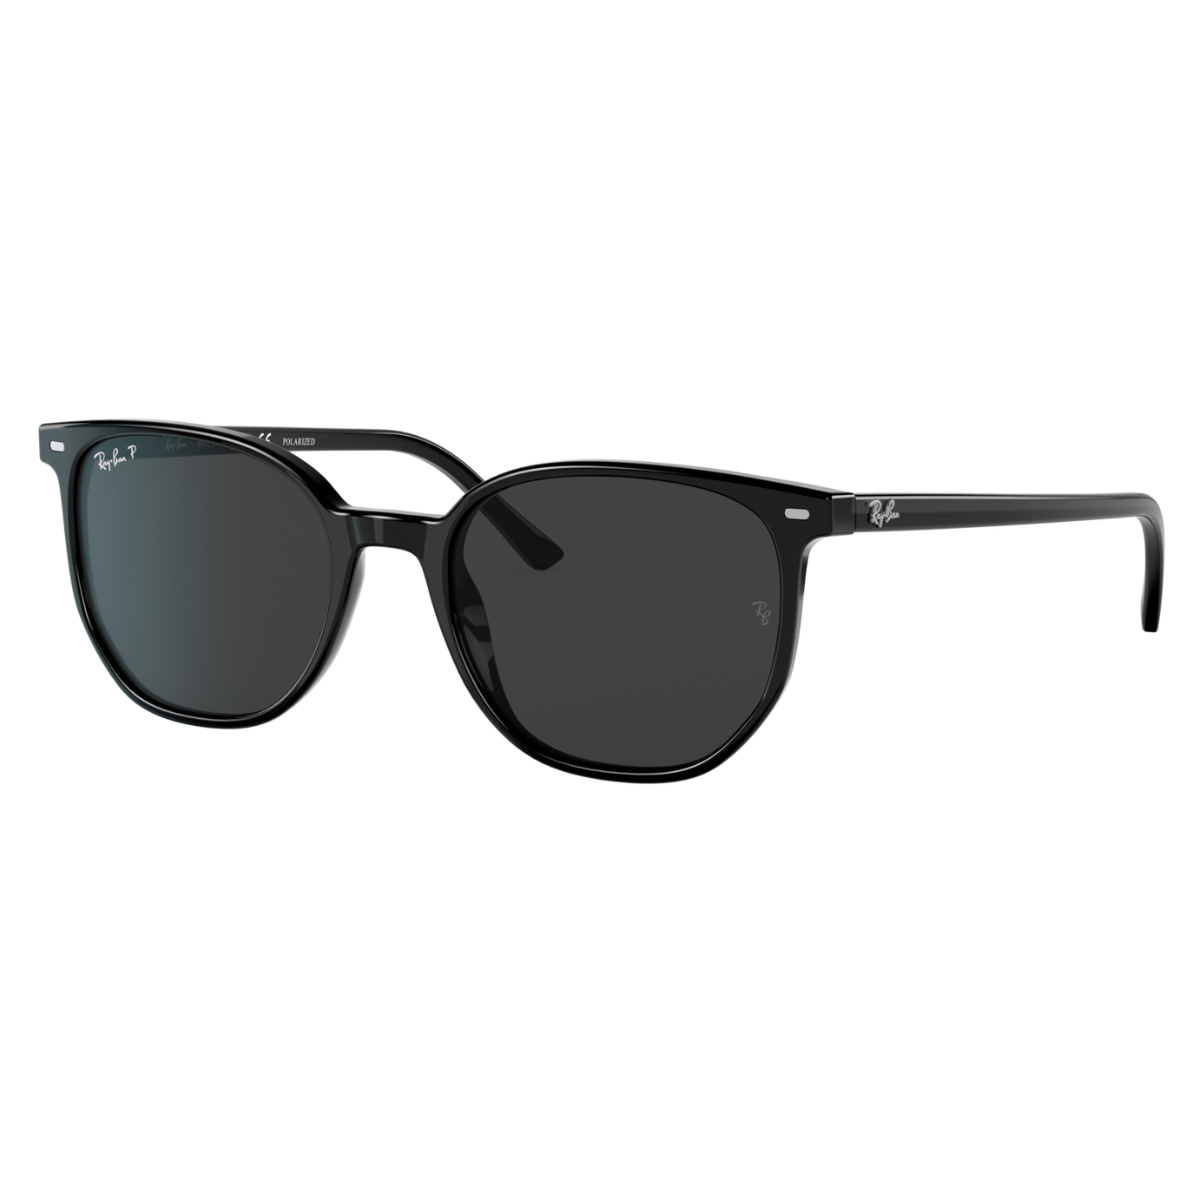 "Optorium presents Ray Ban RB2197 Polarised Grey Square Unisex Sunglasses for men and women. Explore our diverse Ray Ban eyewear range and purchase sunglasses online at competitive prices. Embrace iconic style and eye protection with Ray Ban sunglasses."